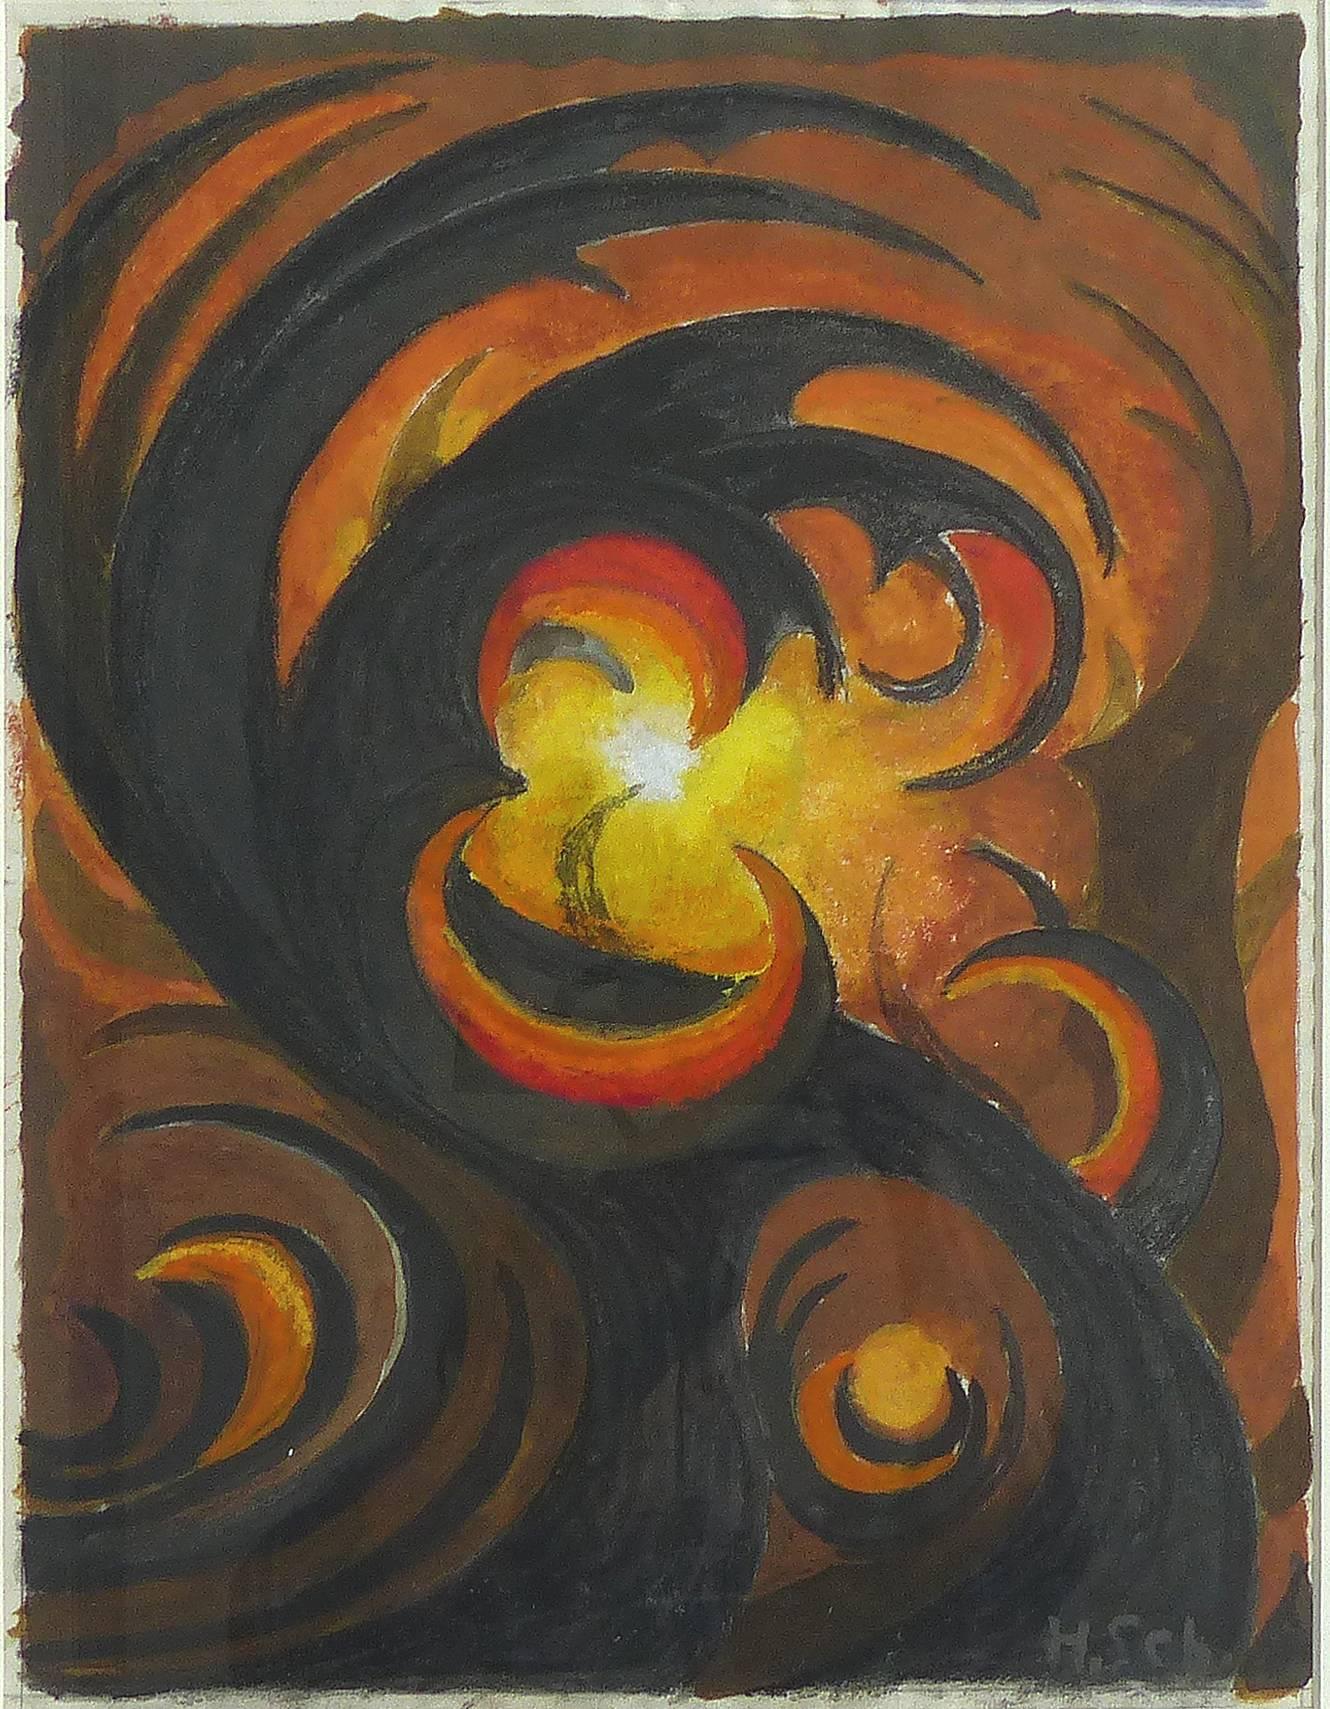 Early Goache by Hans Schmithals, 1903 from the Joan & Lester Avnet Collection

Offered for sale is an early painting in gouache by Hans Schimthals (Germany 1878-1964). Considered by many to be a Pioneer of abstract art, this piece titled 